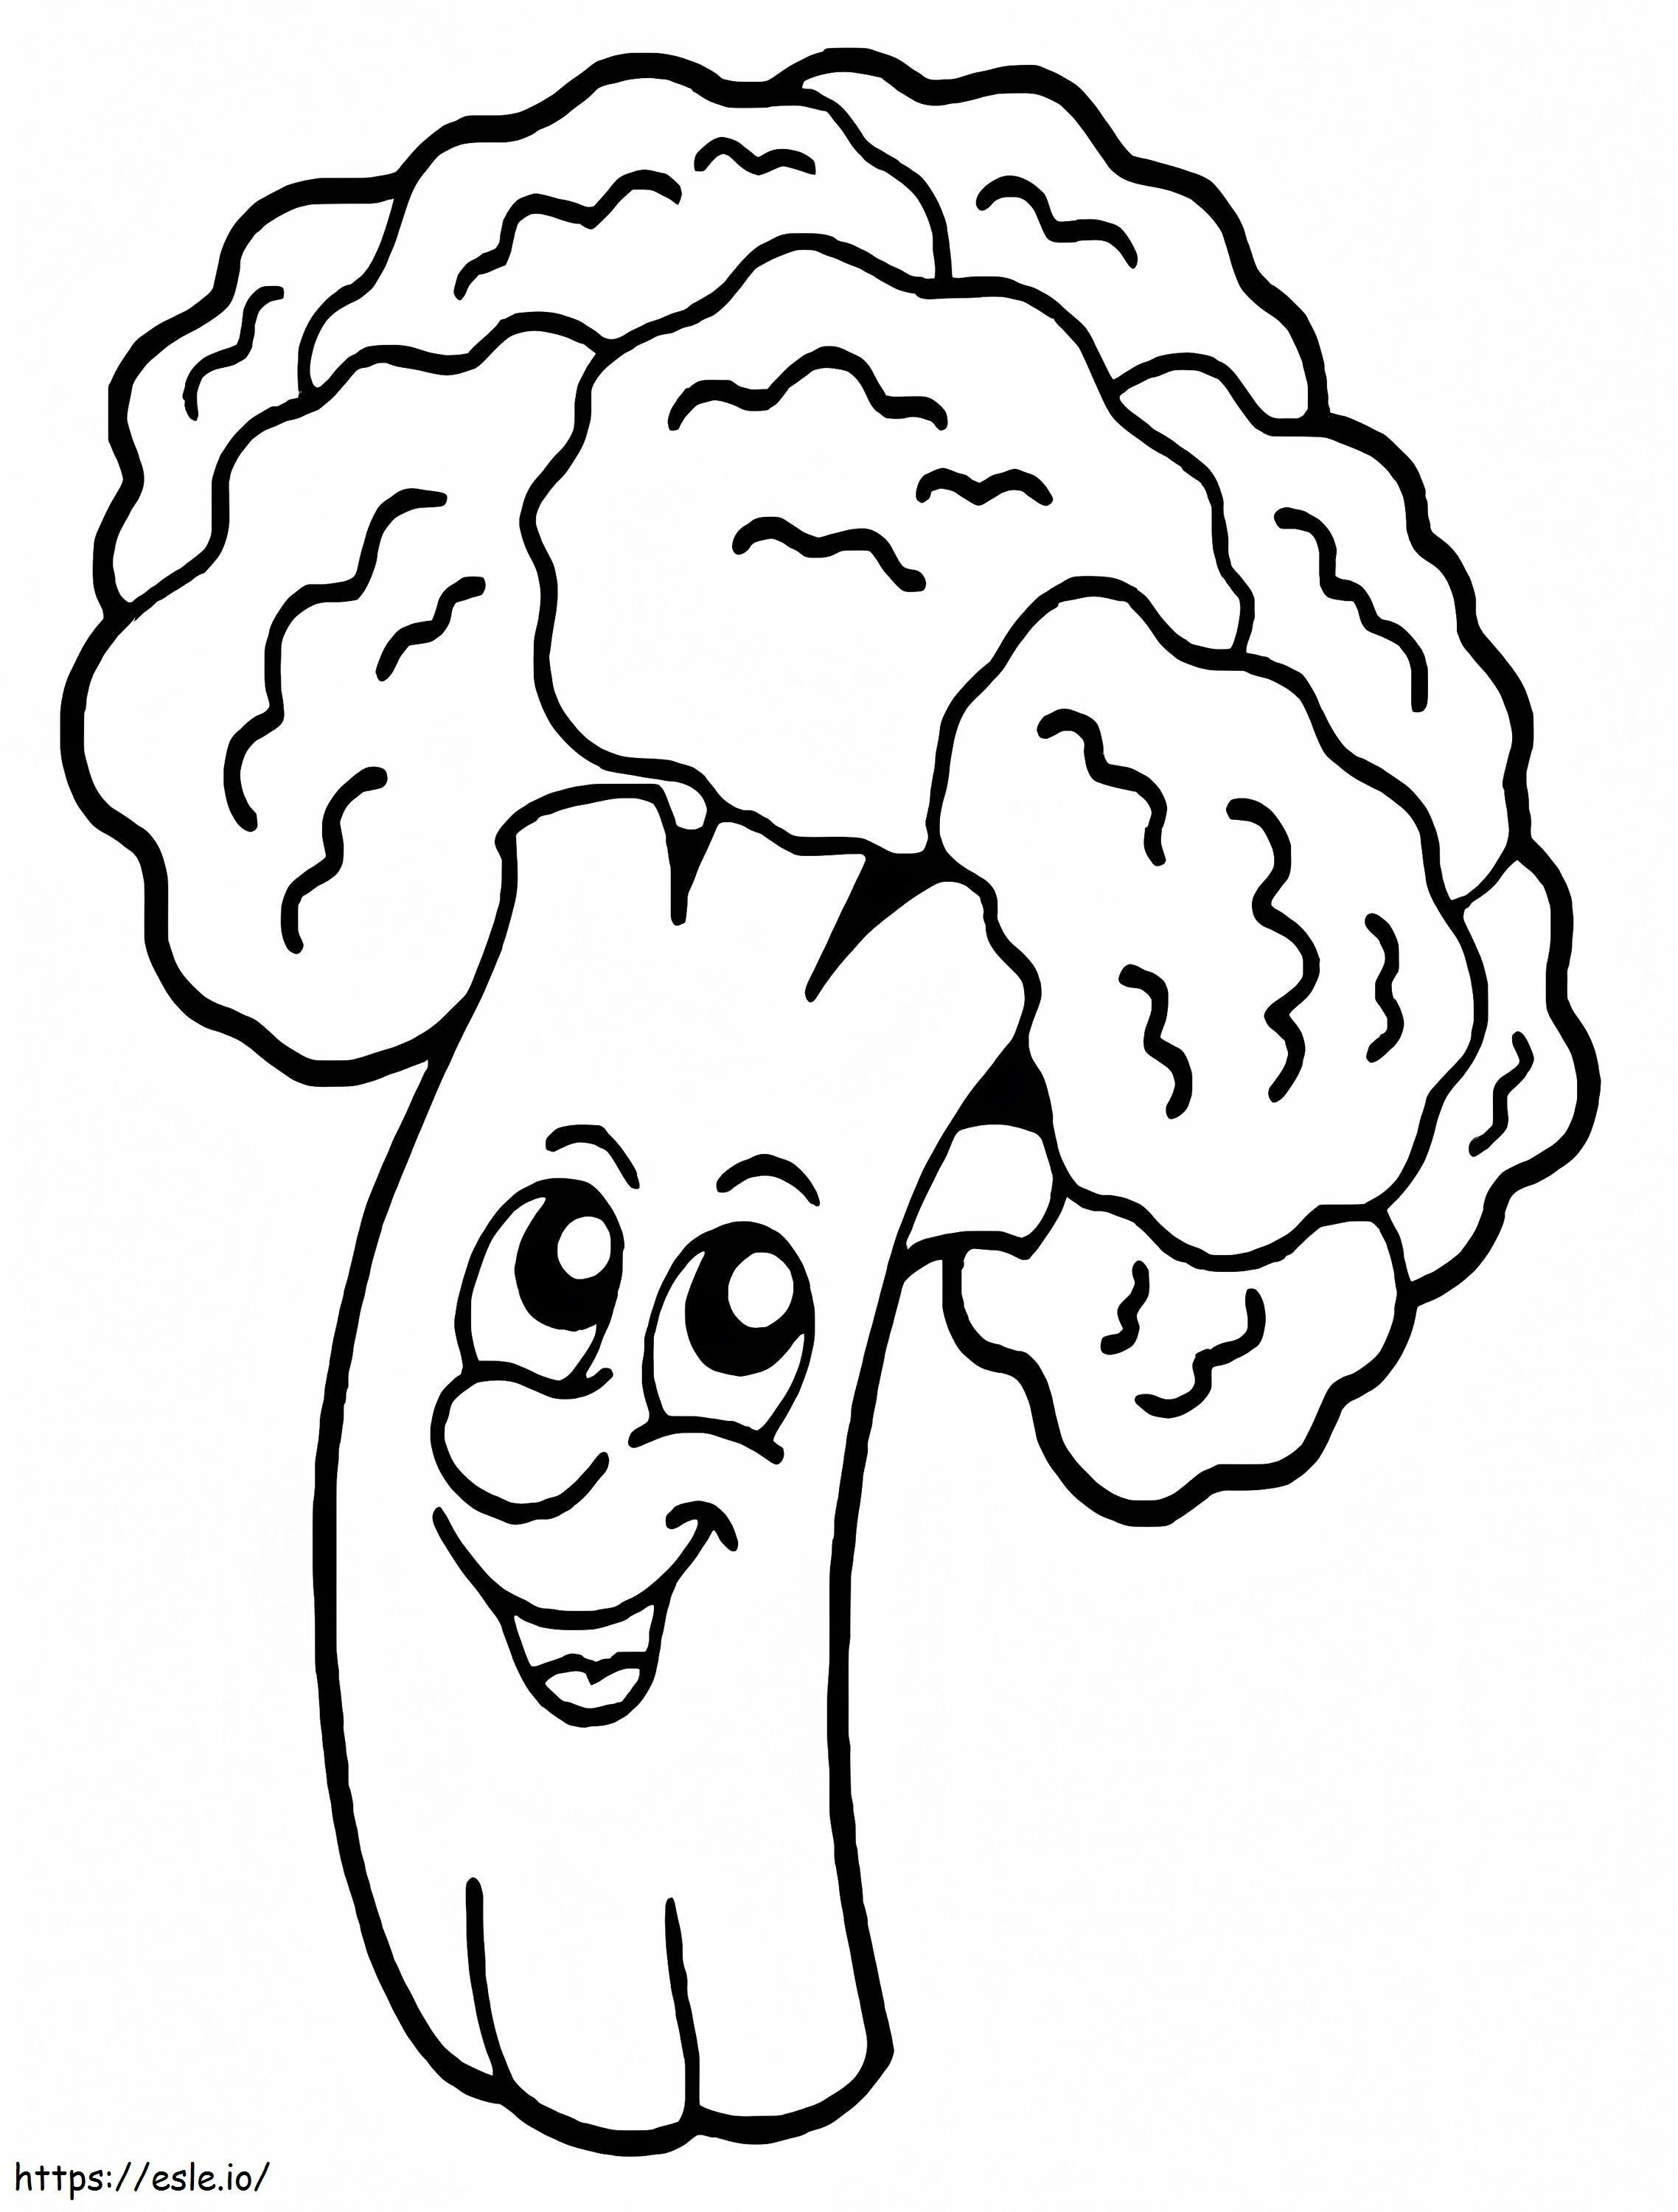 Animated Broccoli coloring page